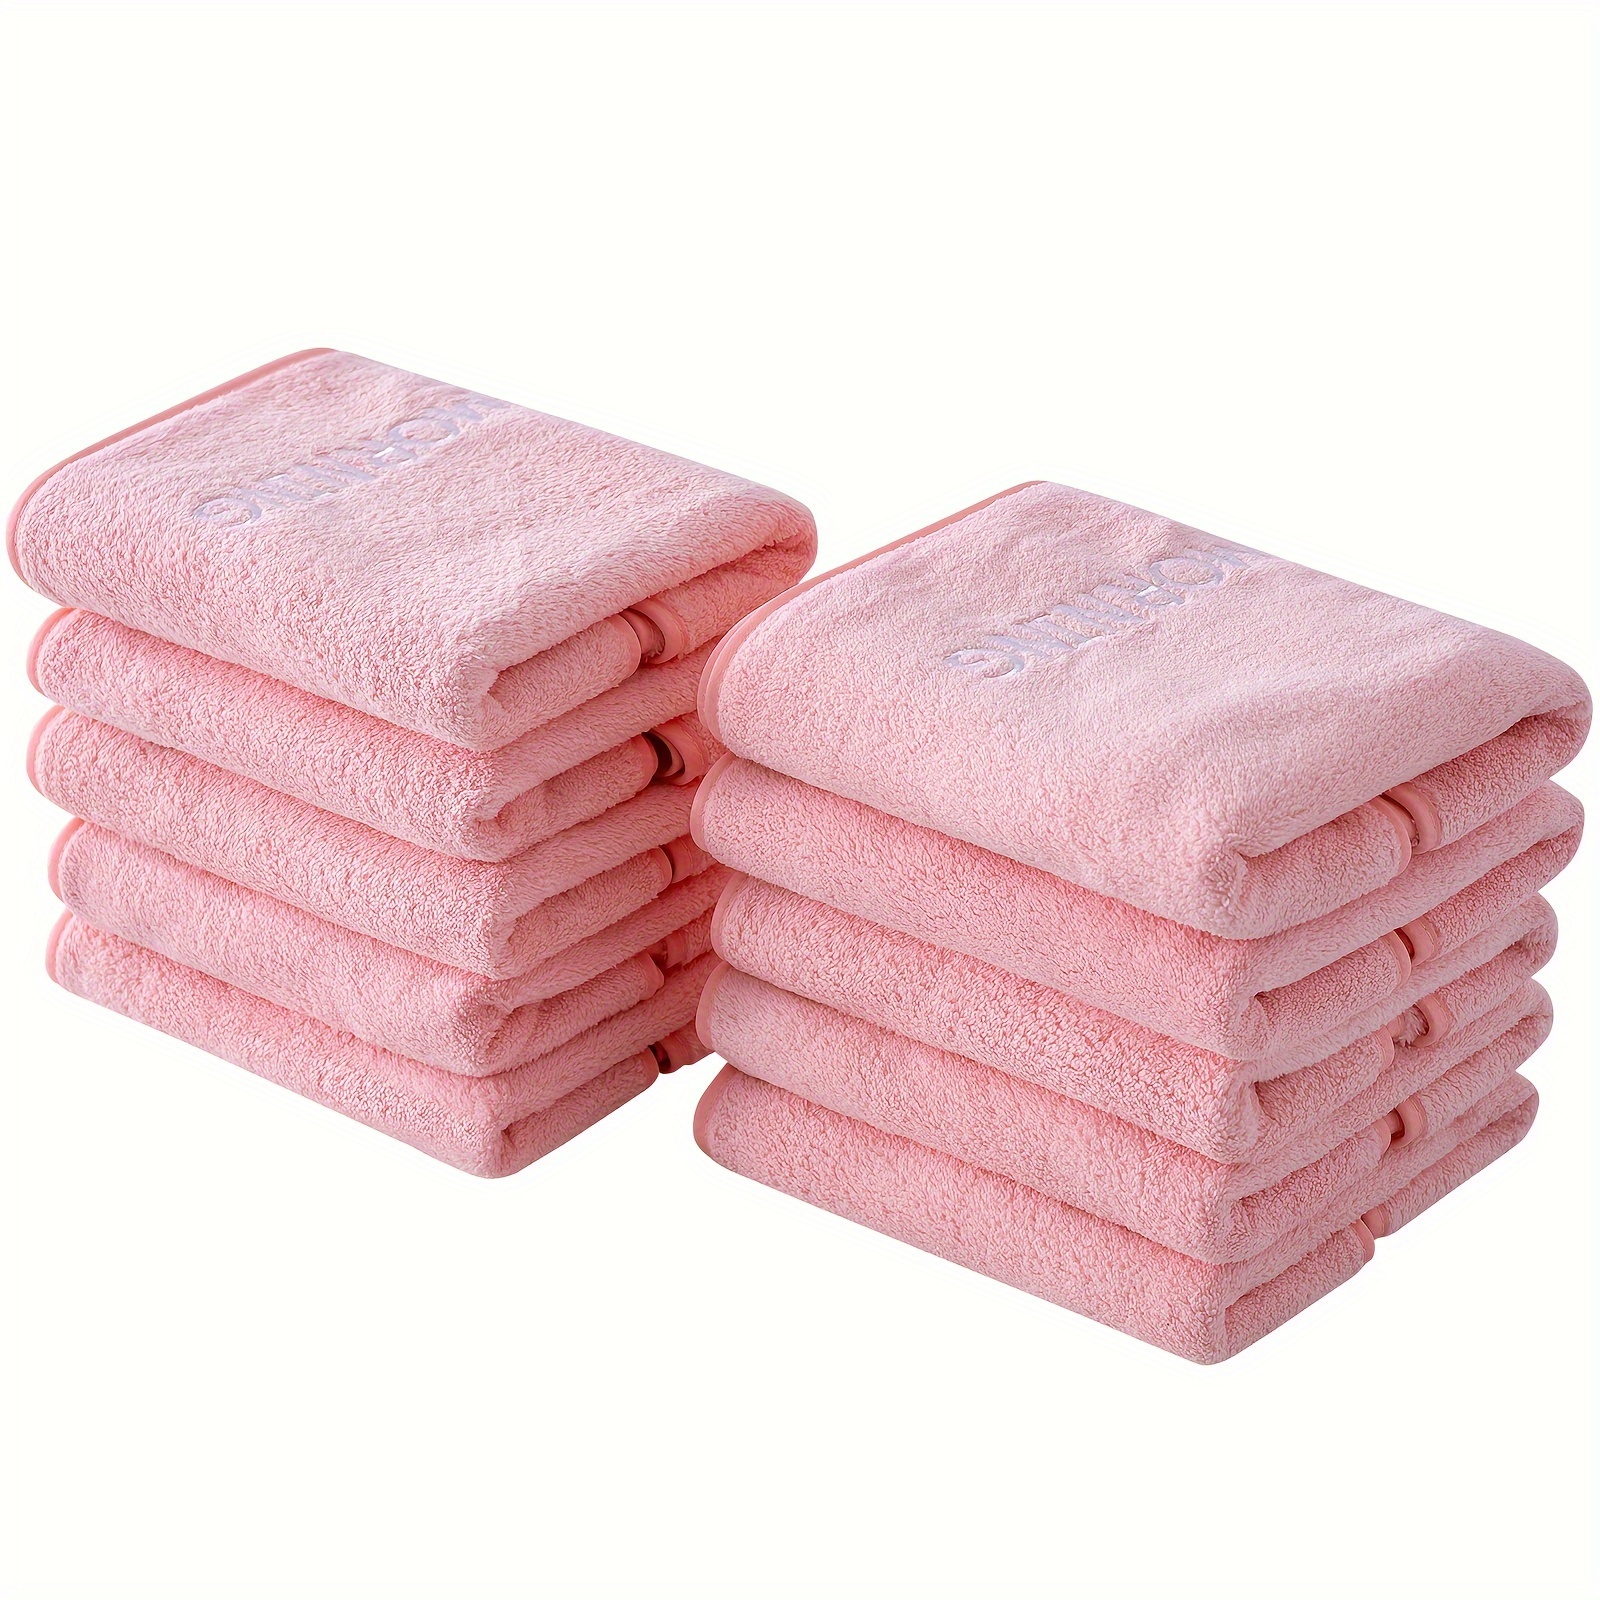  The Most Absorbent and Fast Drying Premium Microfiber